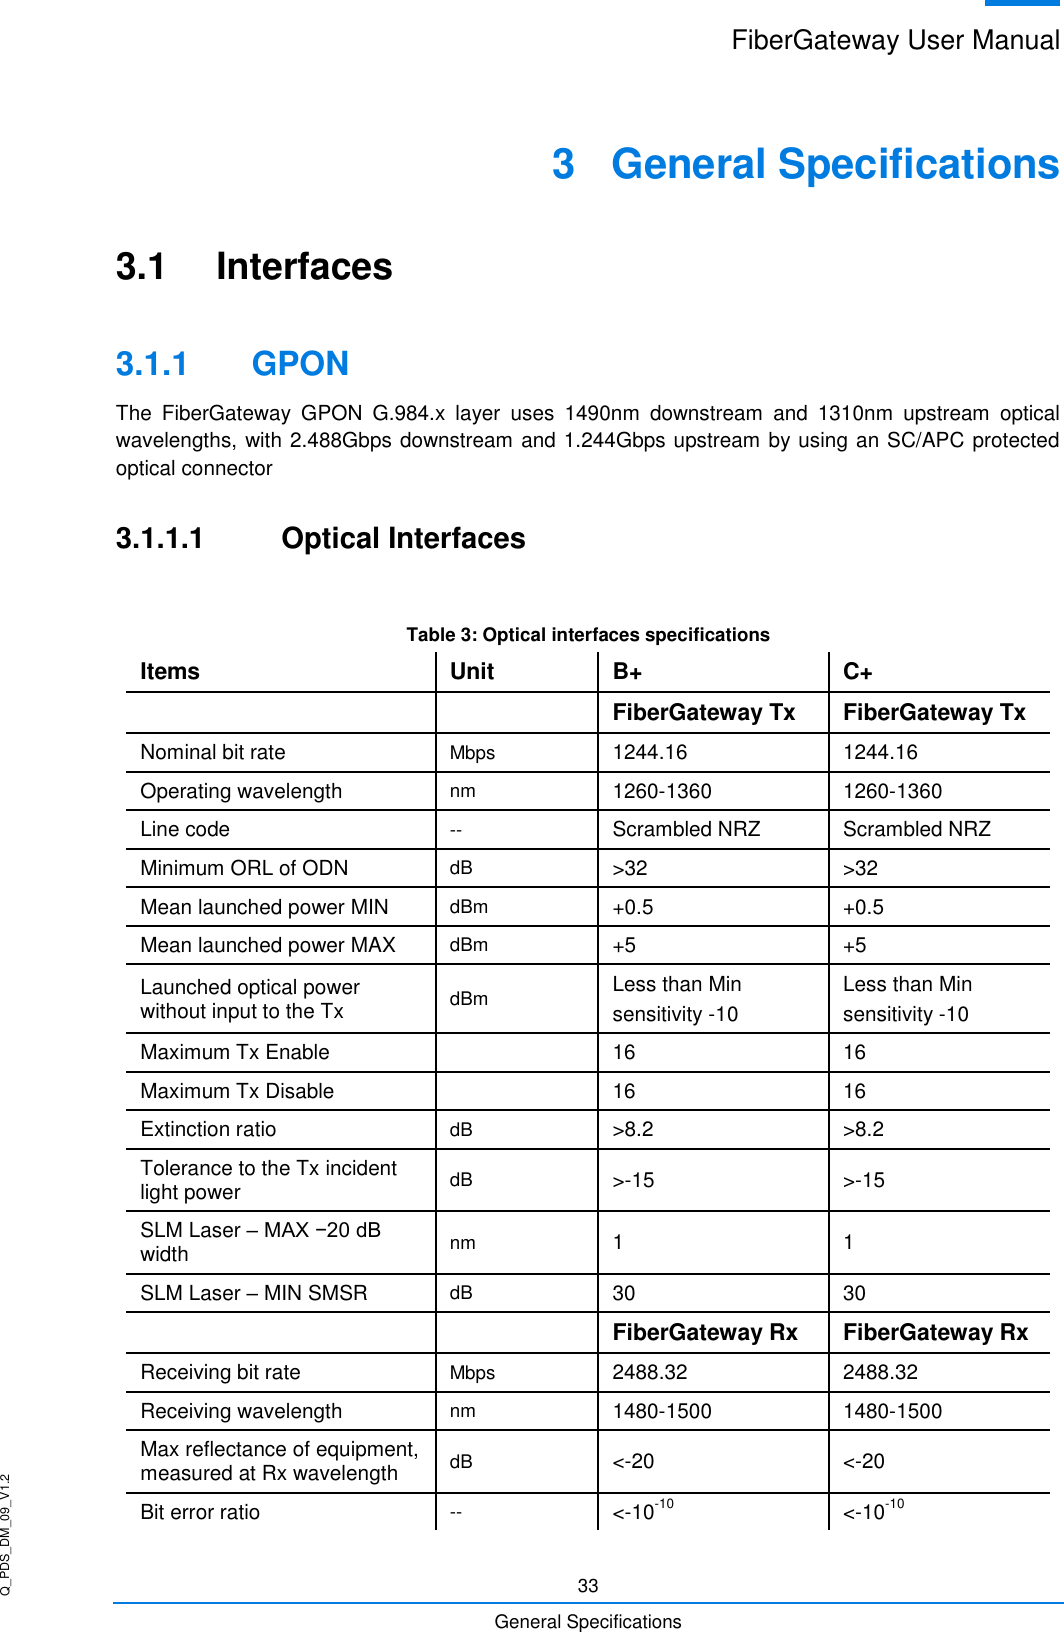 Q_PDS_DM_09_V1.2 FiberGateway User Manual  33 General Specifications 3  General Specifications 3.1  Interfaces 3.1.1  GPON The  FiberGateway  GPON  G.984.x  layer  uses  1490nm  downstream  and  1310nm  upstream  optical wavelengths, with 2.488Gbps downstream and 1.244Gbps upstream by using an SC/APC protected optical connector 3.1.1.1  Optical Interfaces  Table 3: Optical interfaces specifications Items Unit B+ C+   FiberGateway Tx FiberGateway Tx Nominal bit rate Mbps 1244.16 1244.16 Operating wavelength nm 1260-1360 1260-1360 Line code -- Scrambled NRZ Scrambled NRZ Minimum ORL of ODN dB &gt;32 &gt;32 Mean launched power MIN dBm +0.5 +0.5 Mean launched power MAX dBm +5 +5 Launched optical power without input to the Tx dBm Less than Min sensitivity -10 Less than Min sensitivity -10 Maximum Tx Enable  16 16 Maximum Tx Disable  16 16 Extinction ratio dB &gt;8.2 &gt;8.2 Tolerance to the Tx incident light power dB &gt;-15 &gt;-15 SLM Laser – MAX −20 dB width nm 1 1 SLM Laser – MIN SMSR dB 30 30   FiberGateway Rx FiberGateway Rx Receiving bit rate Mbps 2488.32 2488.32 Receiving wavelength nm 1480-1500 1480-1500 Max reflectance of equipment, measured at Rx wavelength dB &lt;-20 &lt;-20 Bit error ratio -- &lt;-10-10 &lt;-10-10 